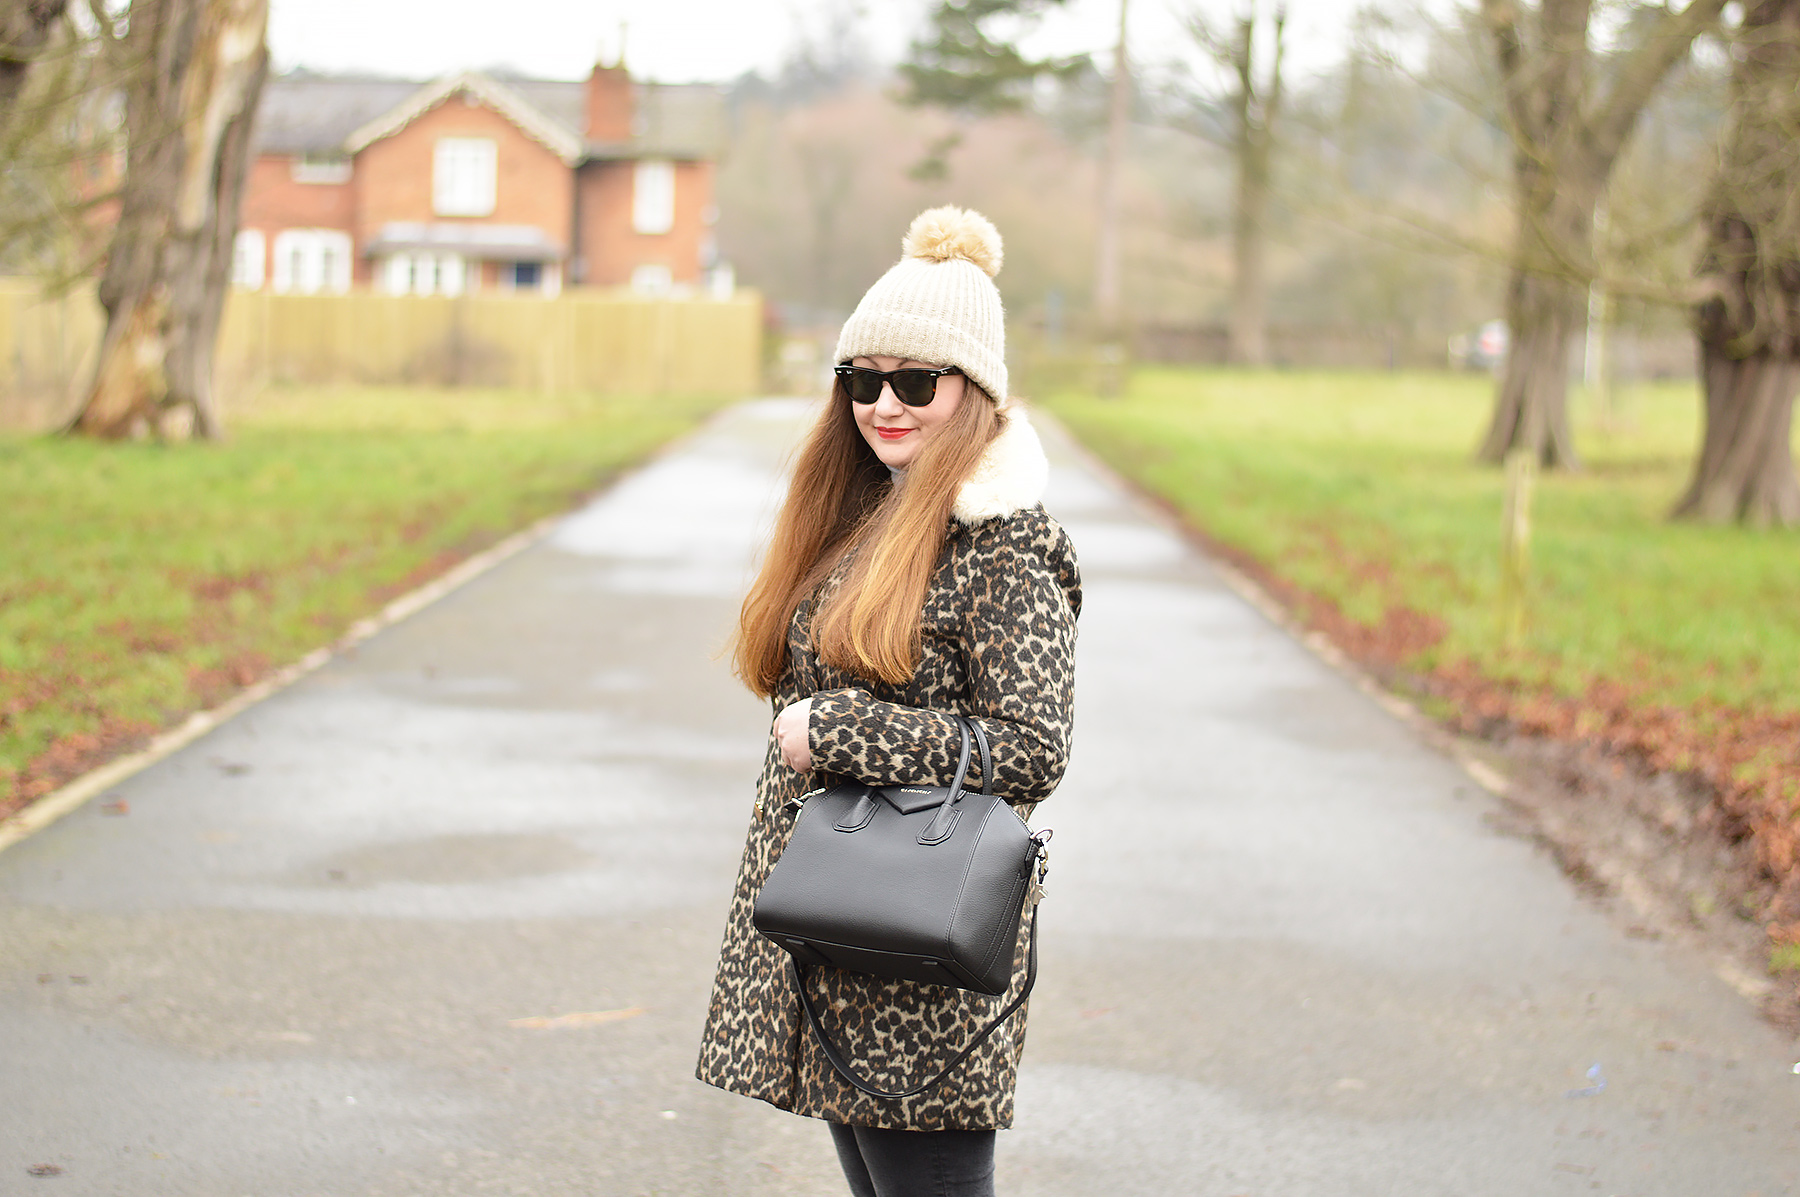 How to wear a leopard print coat in the day